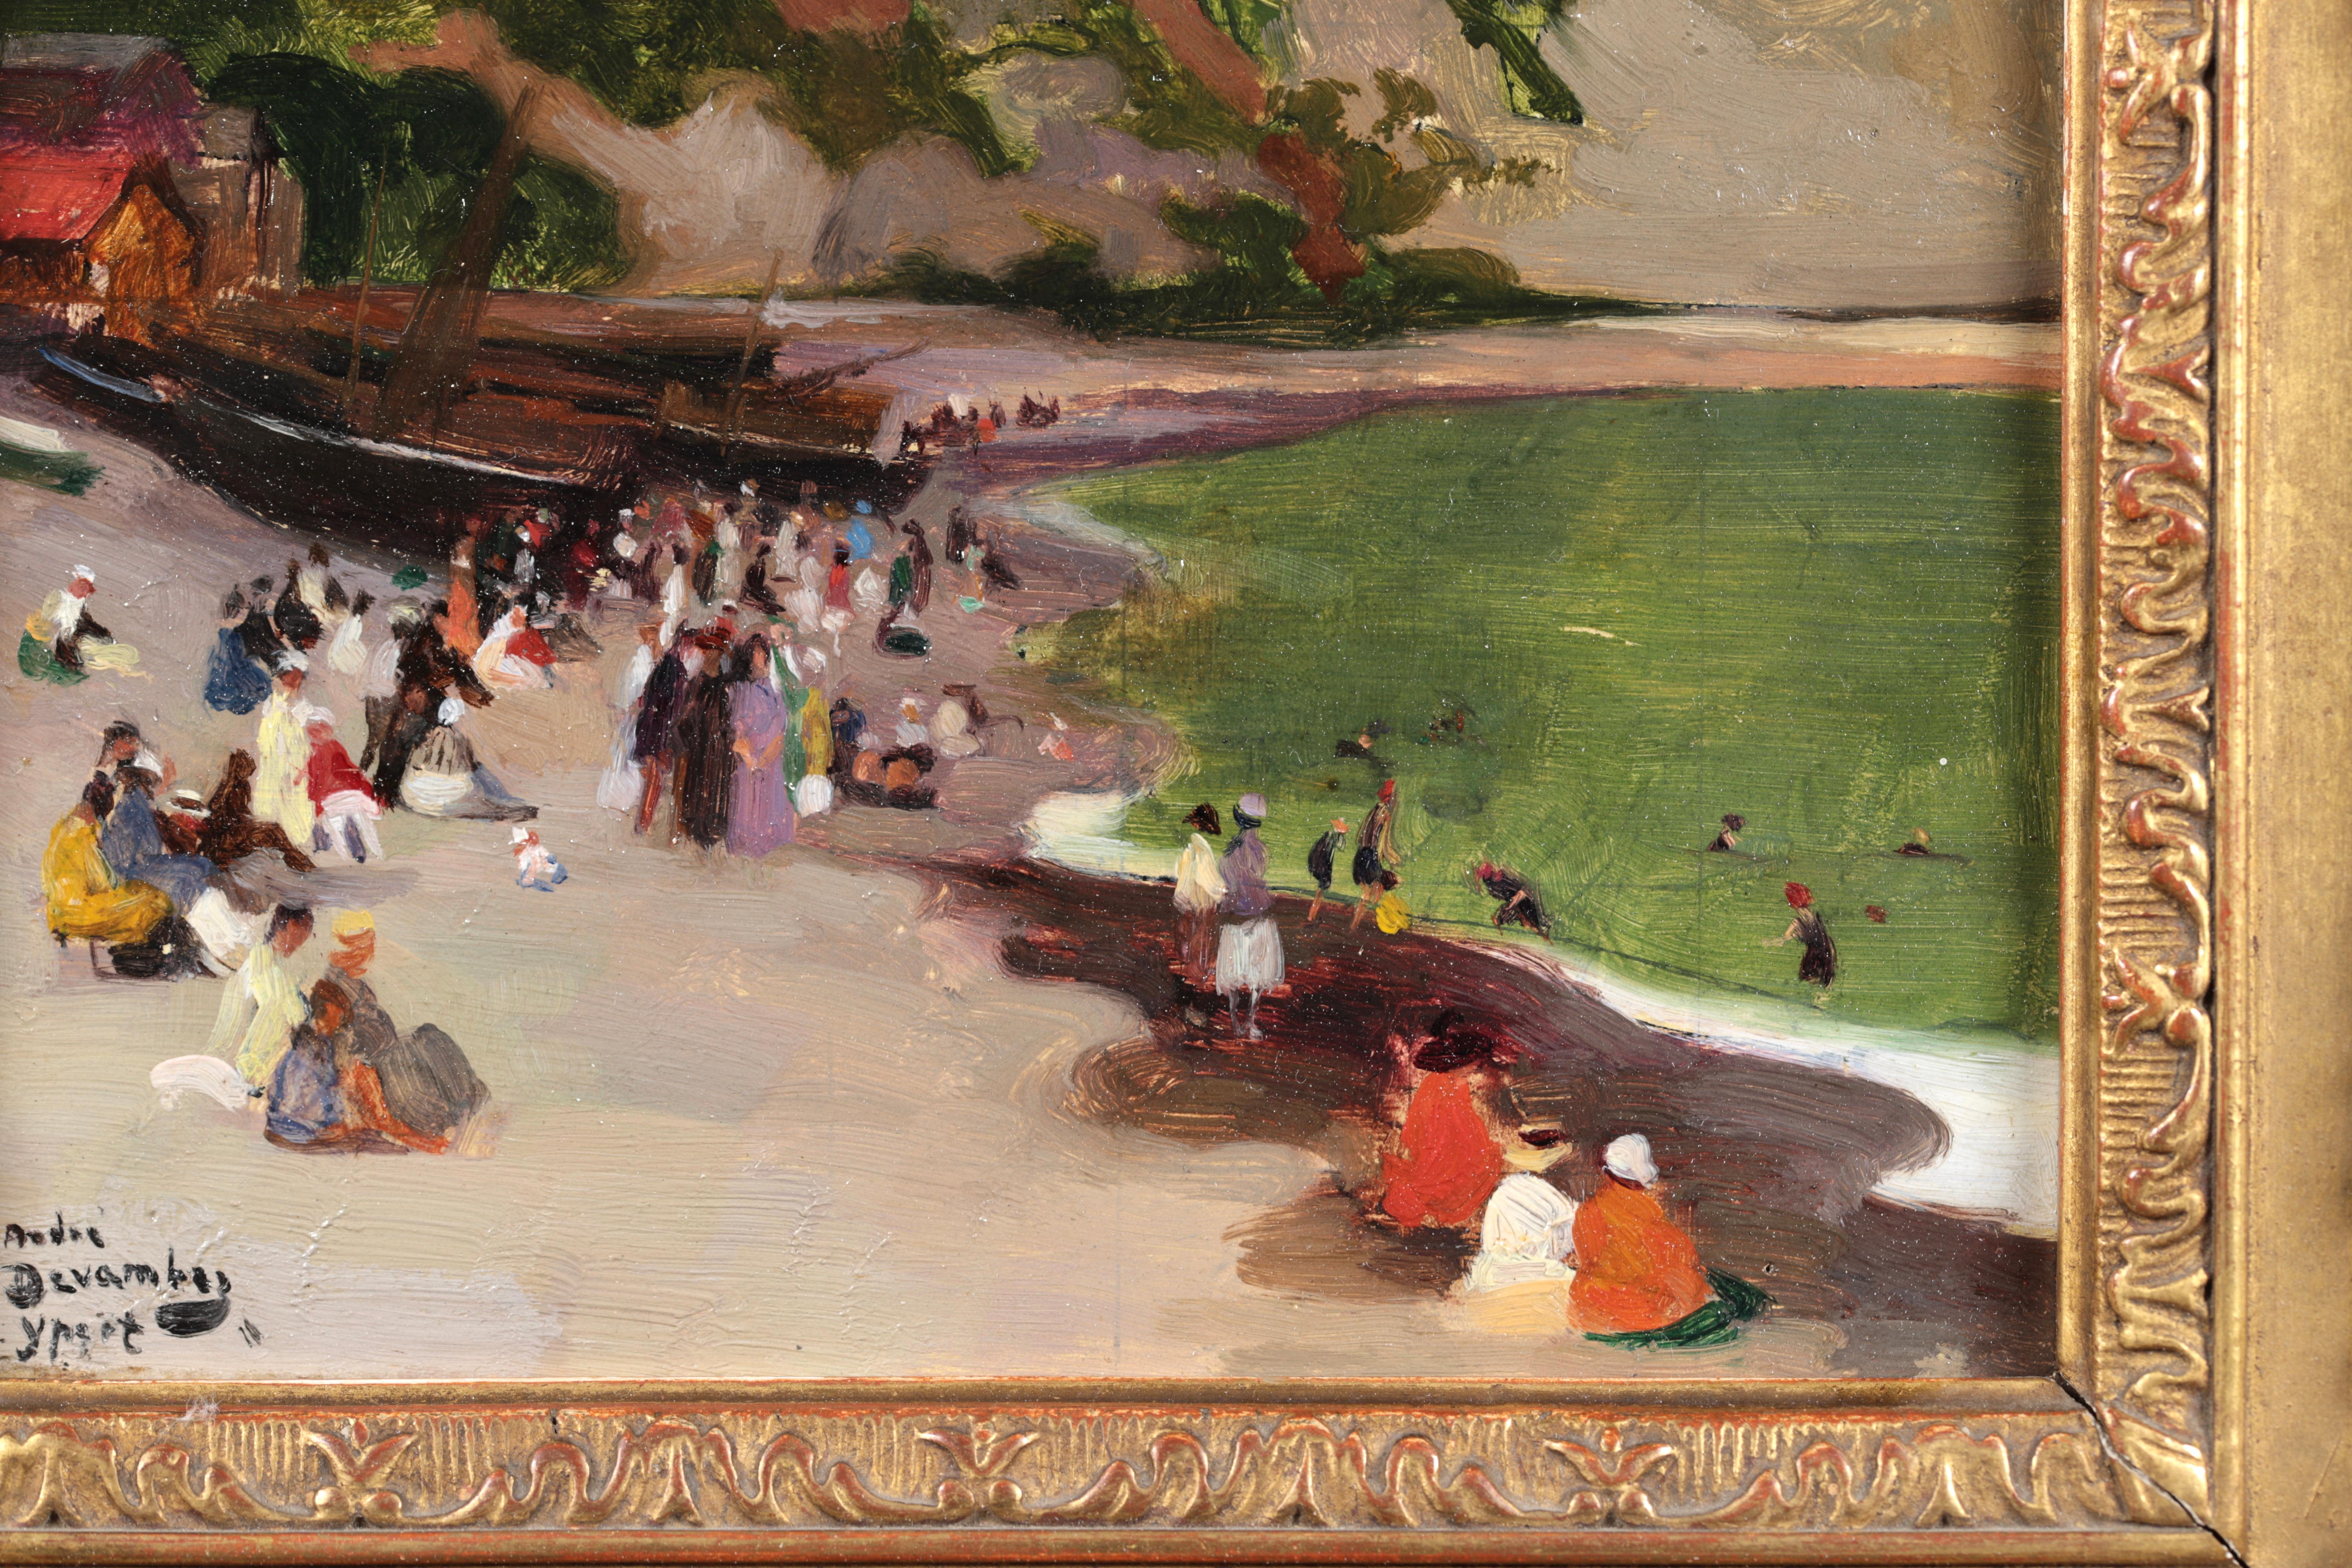 Signed and titled oil on panel figures in landscape circa 1920 by French impressionist painter Andre Devambez. The piece depicts couples and families enjoying a day at the beach at Yport in the Normandy region of Northern France. 

Signature:
Signed